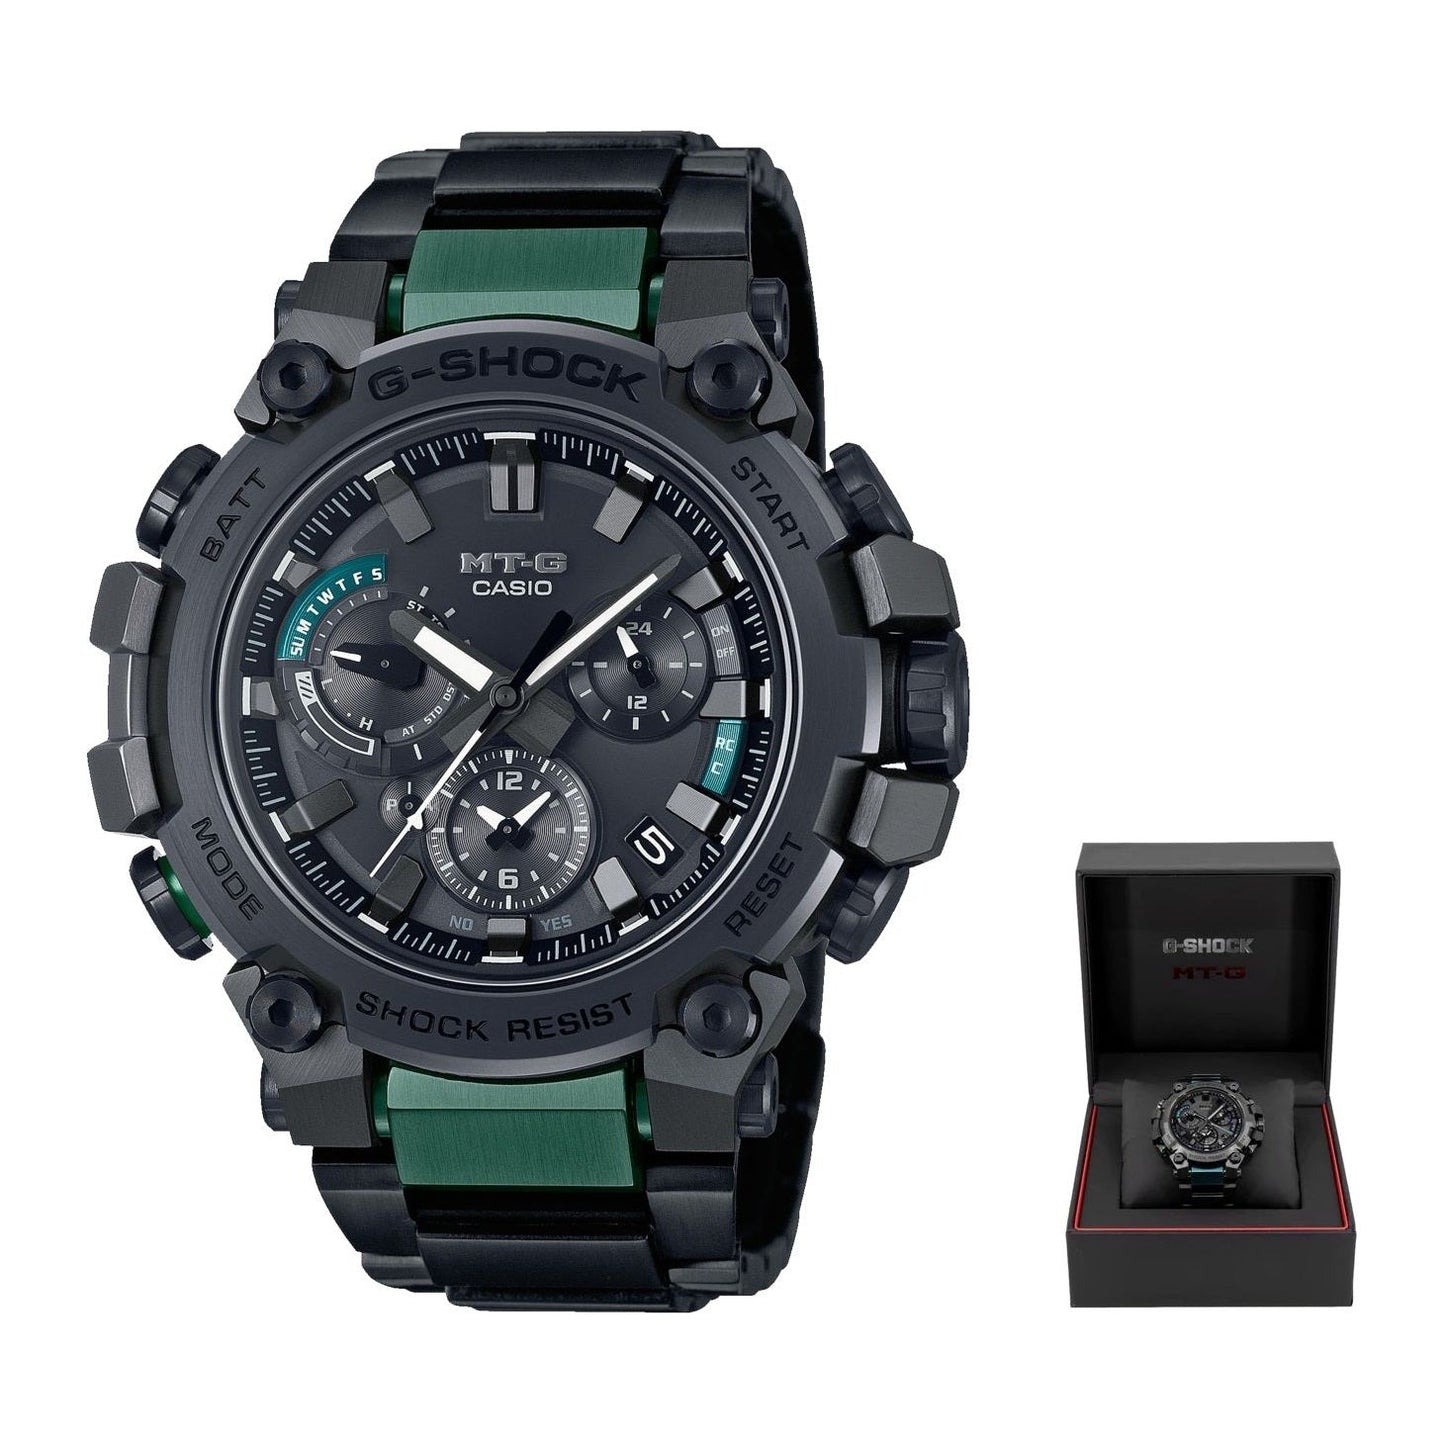 CASIO G-SHOCK CASIO MASTER OF G Mod. METAL TWISTED-G SOLAR POWERED ***Special Price *** WATCHES casio-master-of-g-mod-metal-twisted-g-solar-powered-special-price